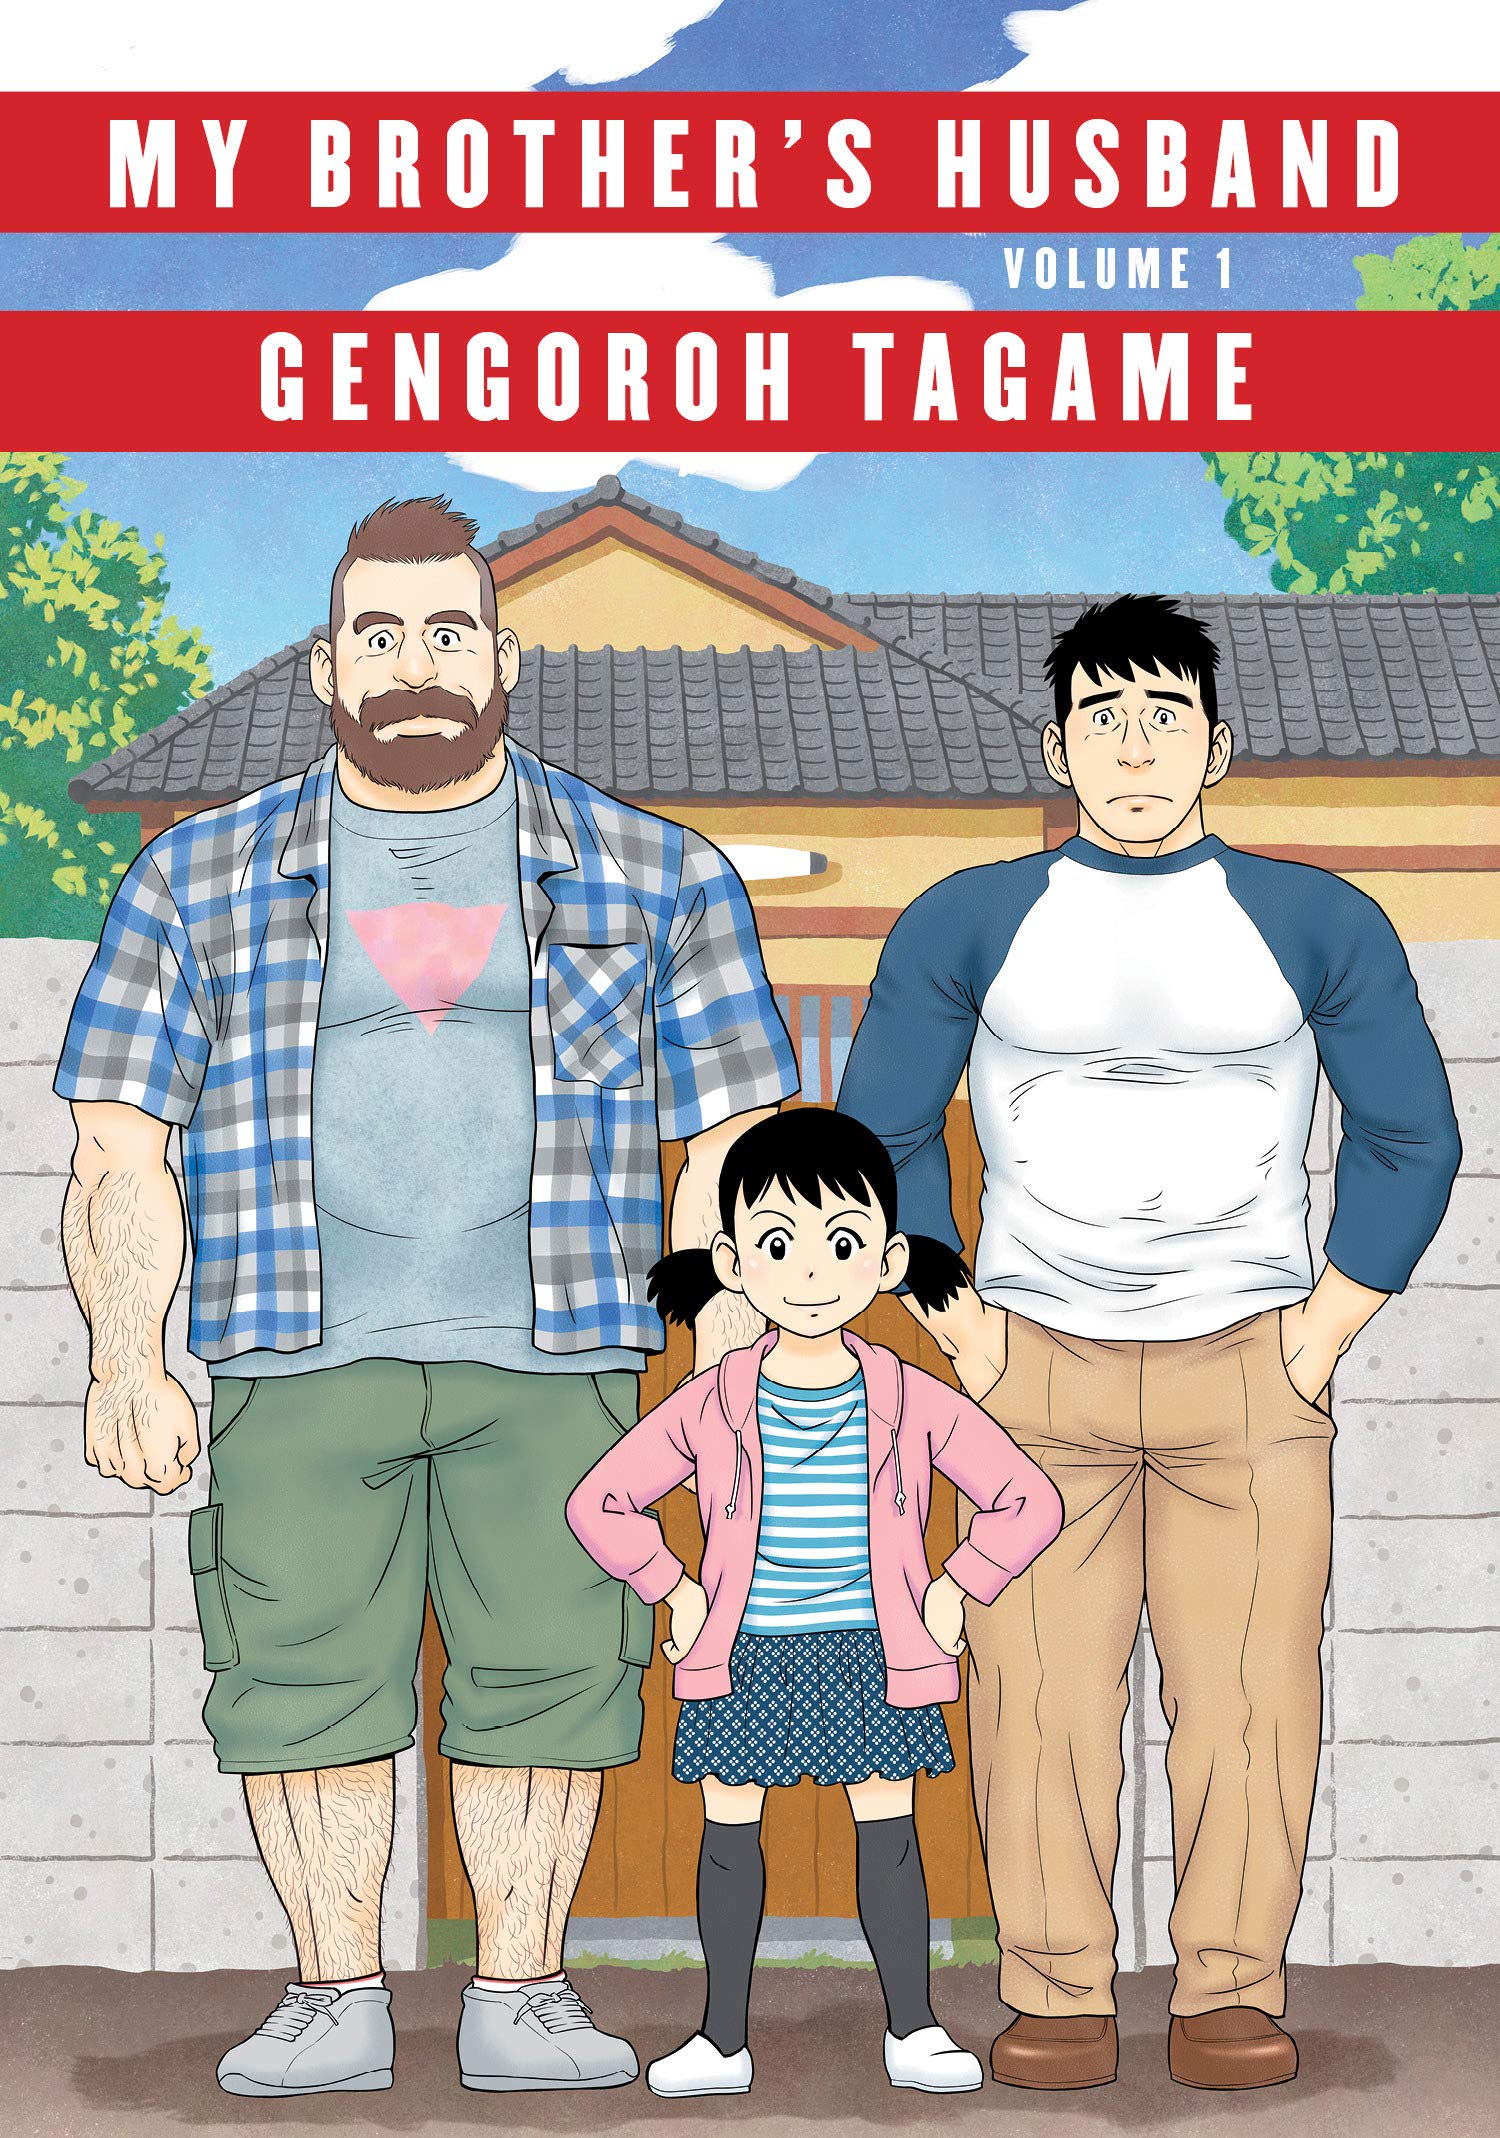 My Brother's Husband by Gengoroh Tagame and Anne Ishii